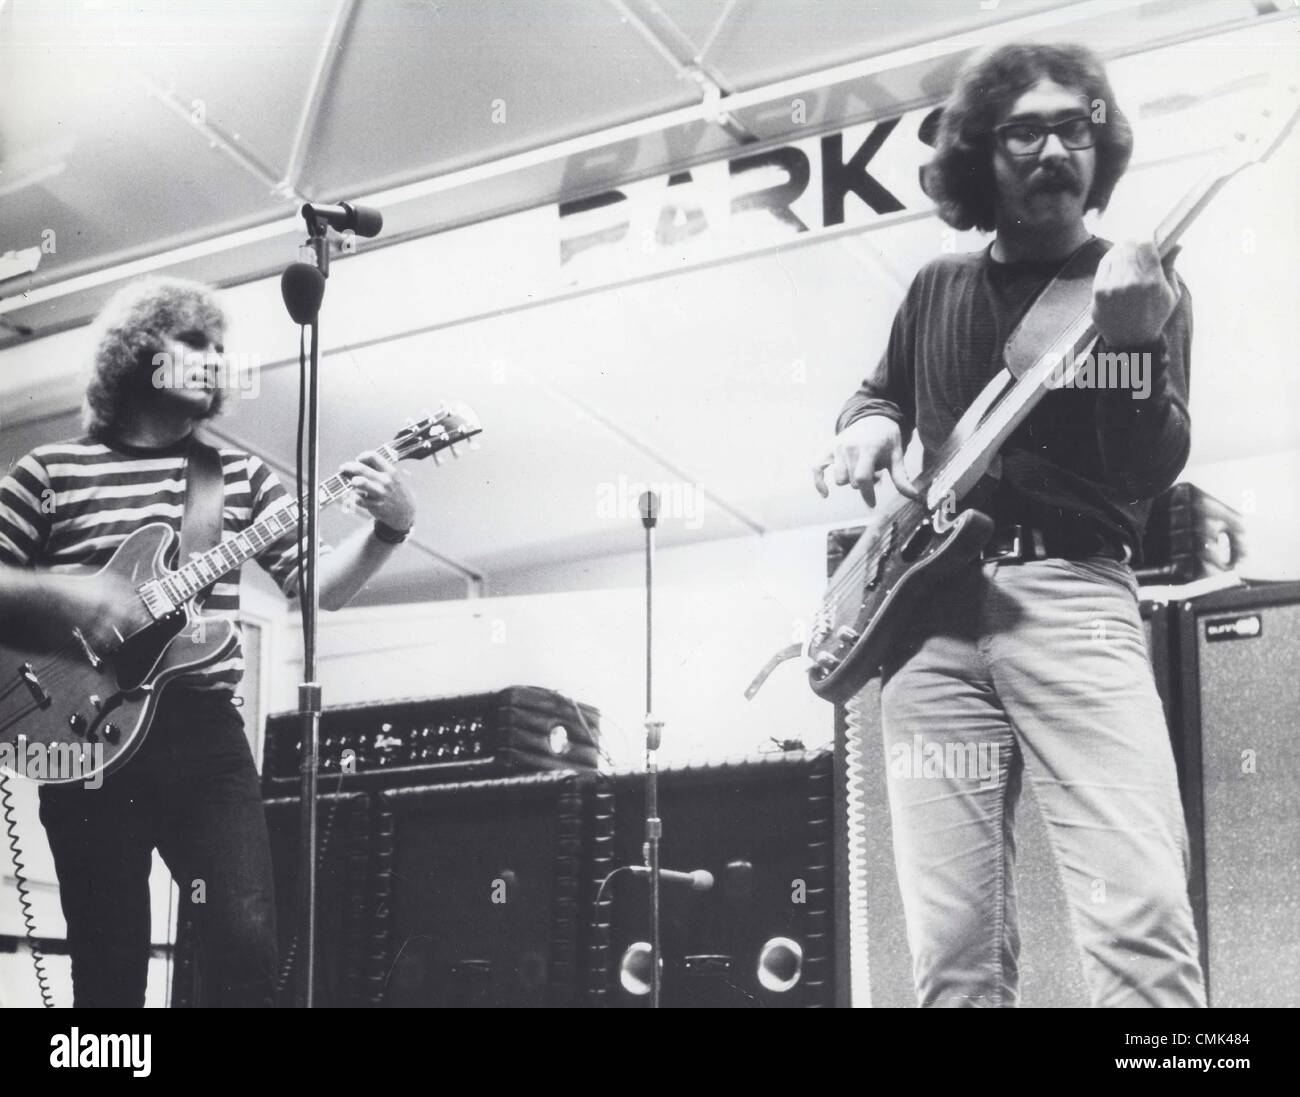 CREEDENCE CLEARWATER REVIVAL.Supplied by   Photos, inc.(Credit Image: Â© Supplied By Globe Photos, Inc/Globe Photos/ZUMAPRESS.com) Stock Photo